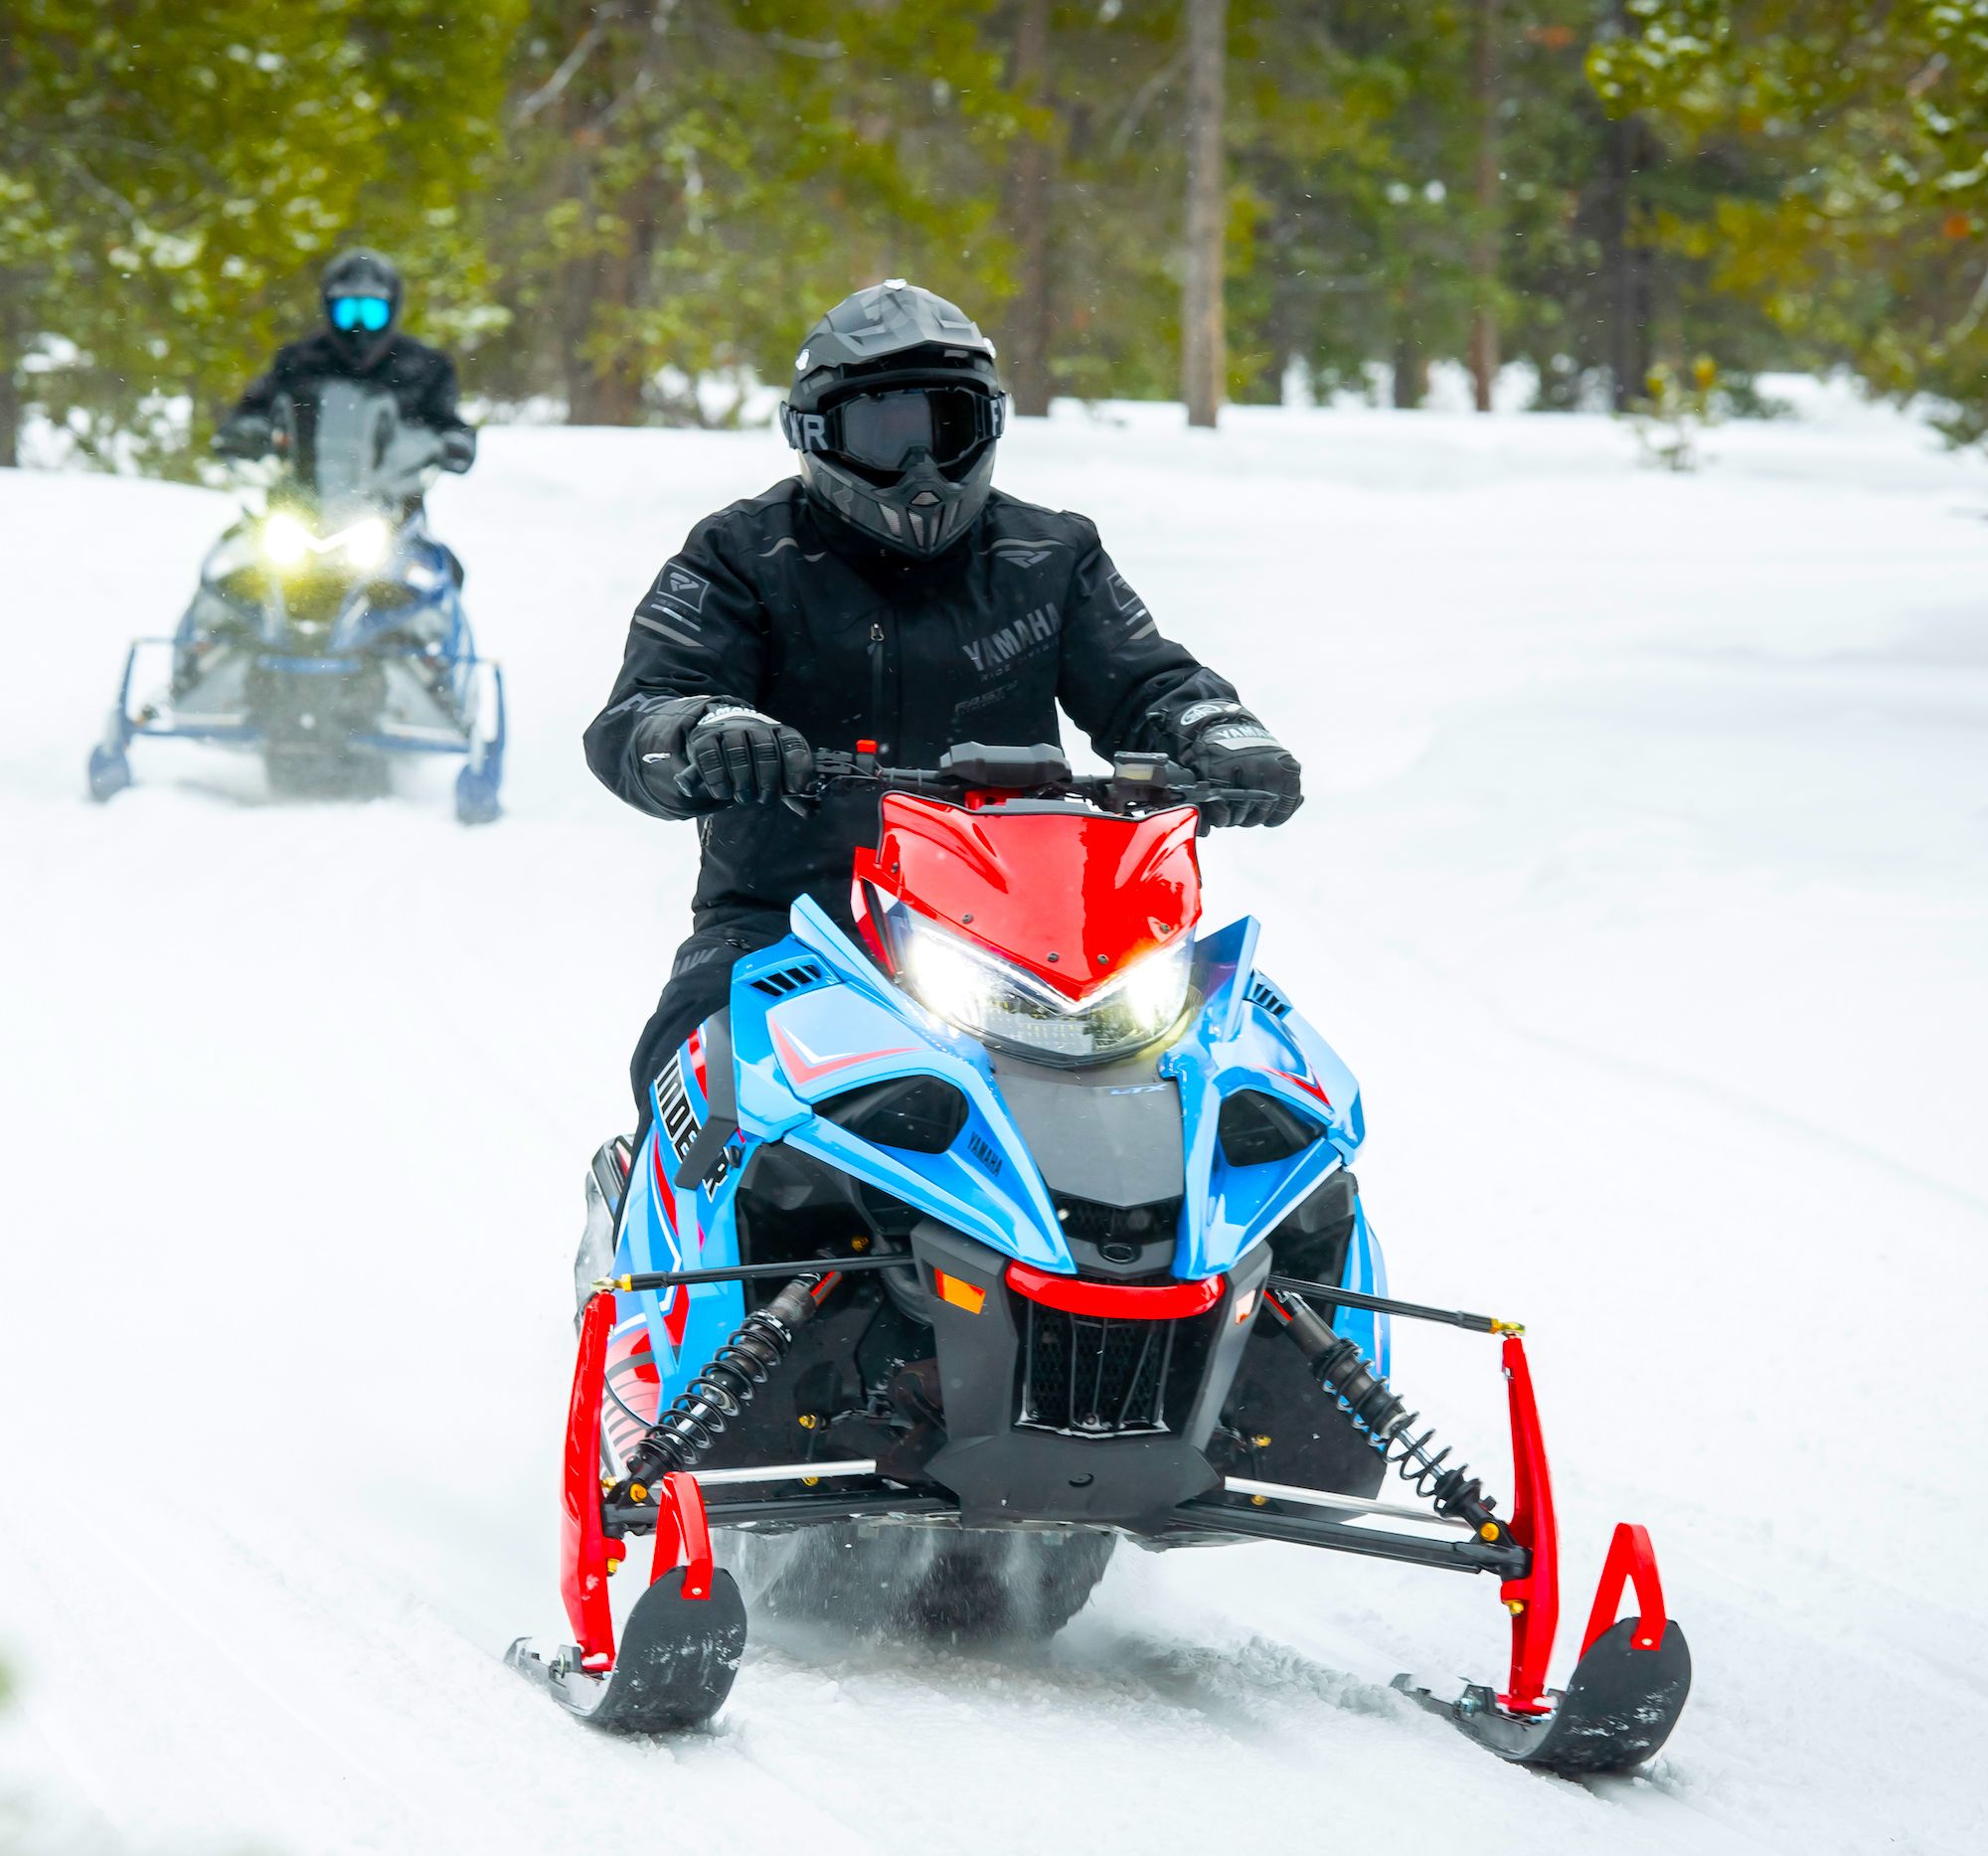 Introducing Yamaha Motor Europe's Snowmobile Line-up for 2023